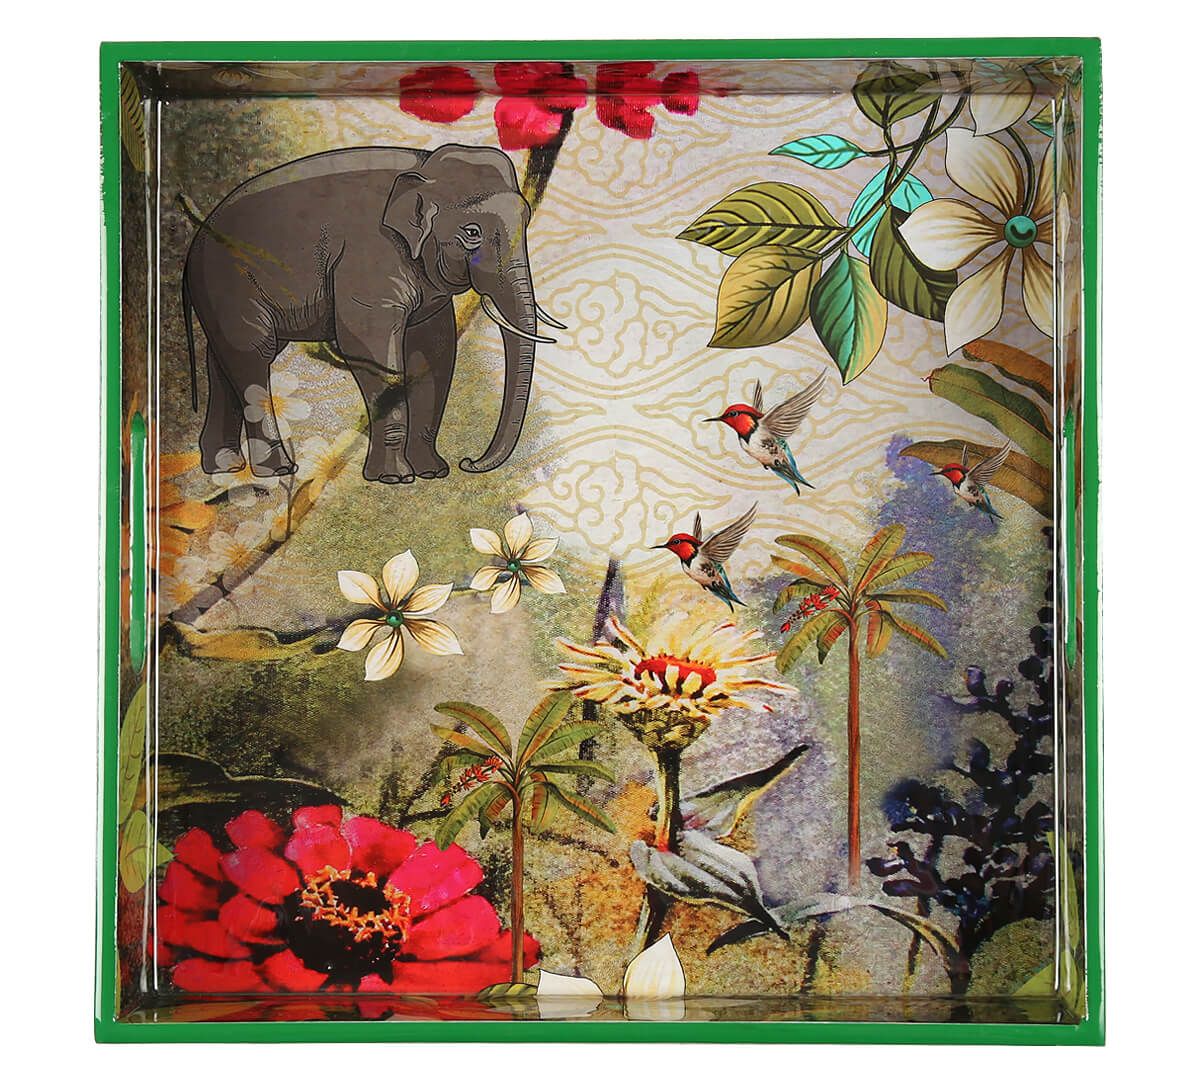 India Circus by Krsnaa Mehta March of the Blossoms MDF Square Tray